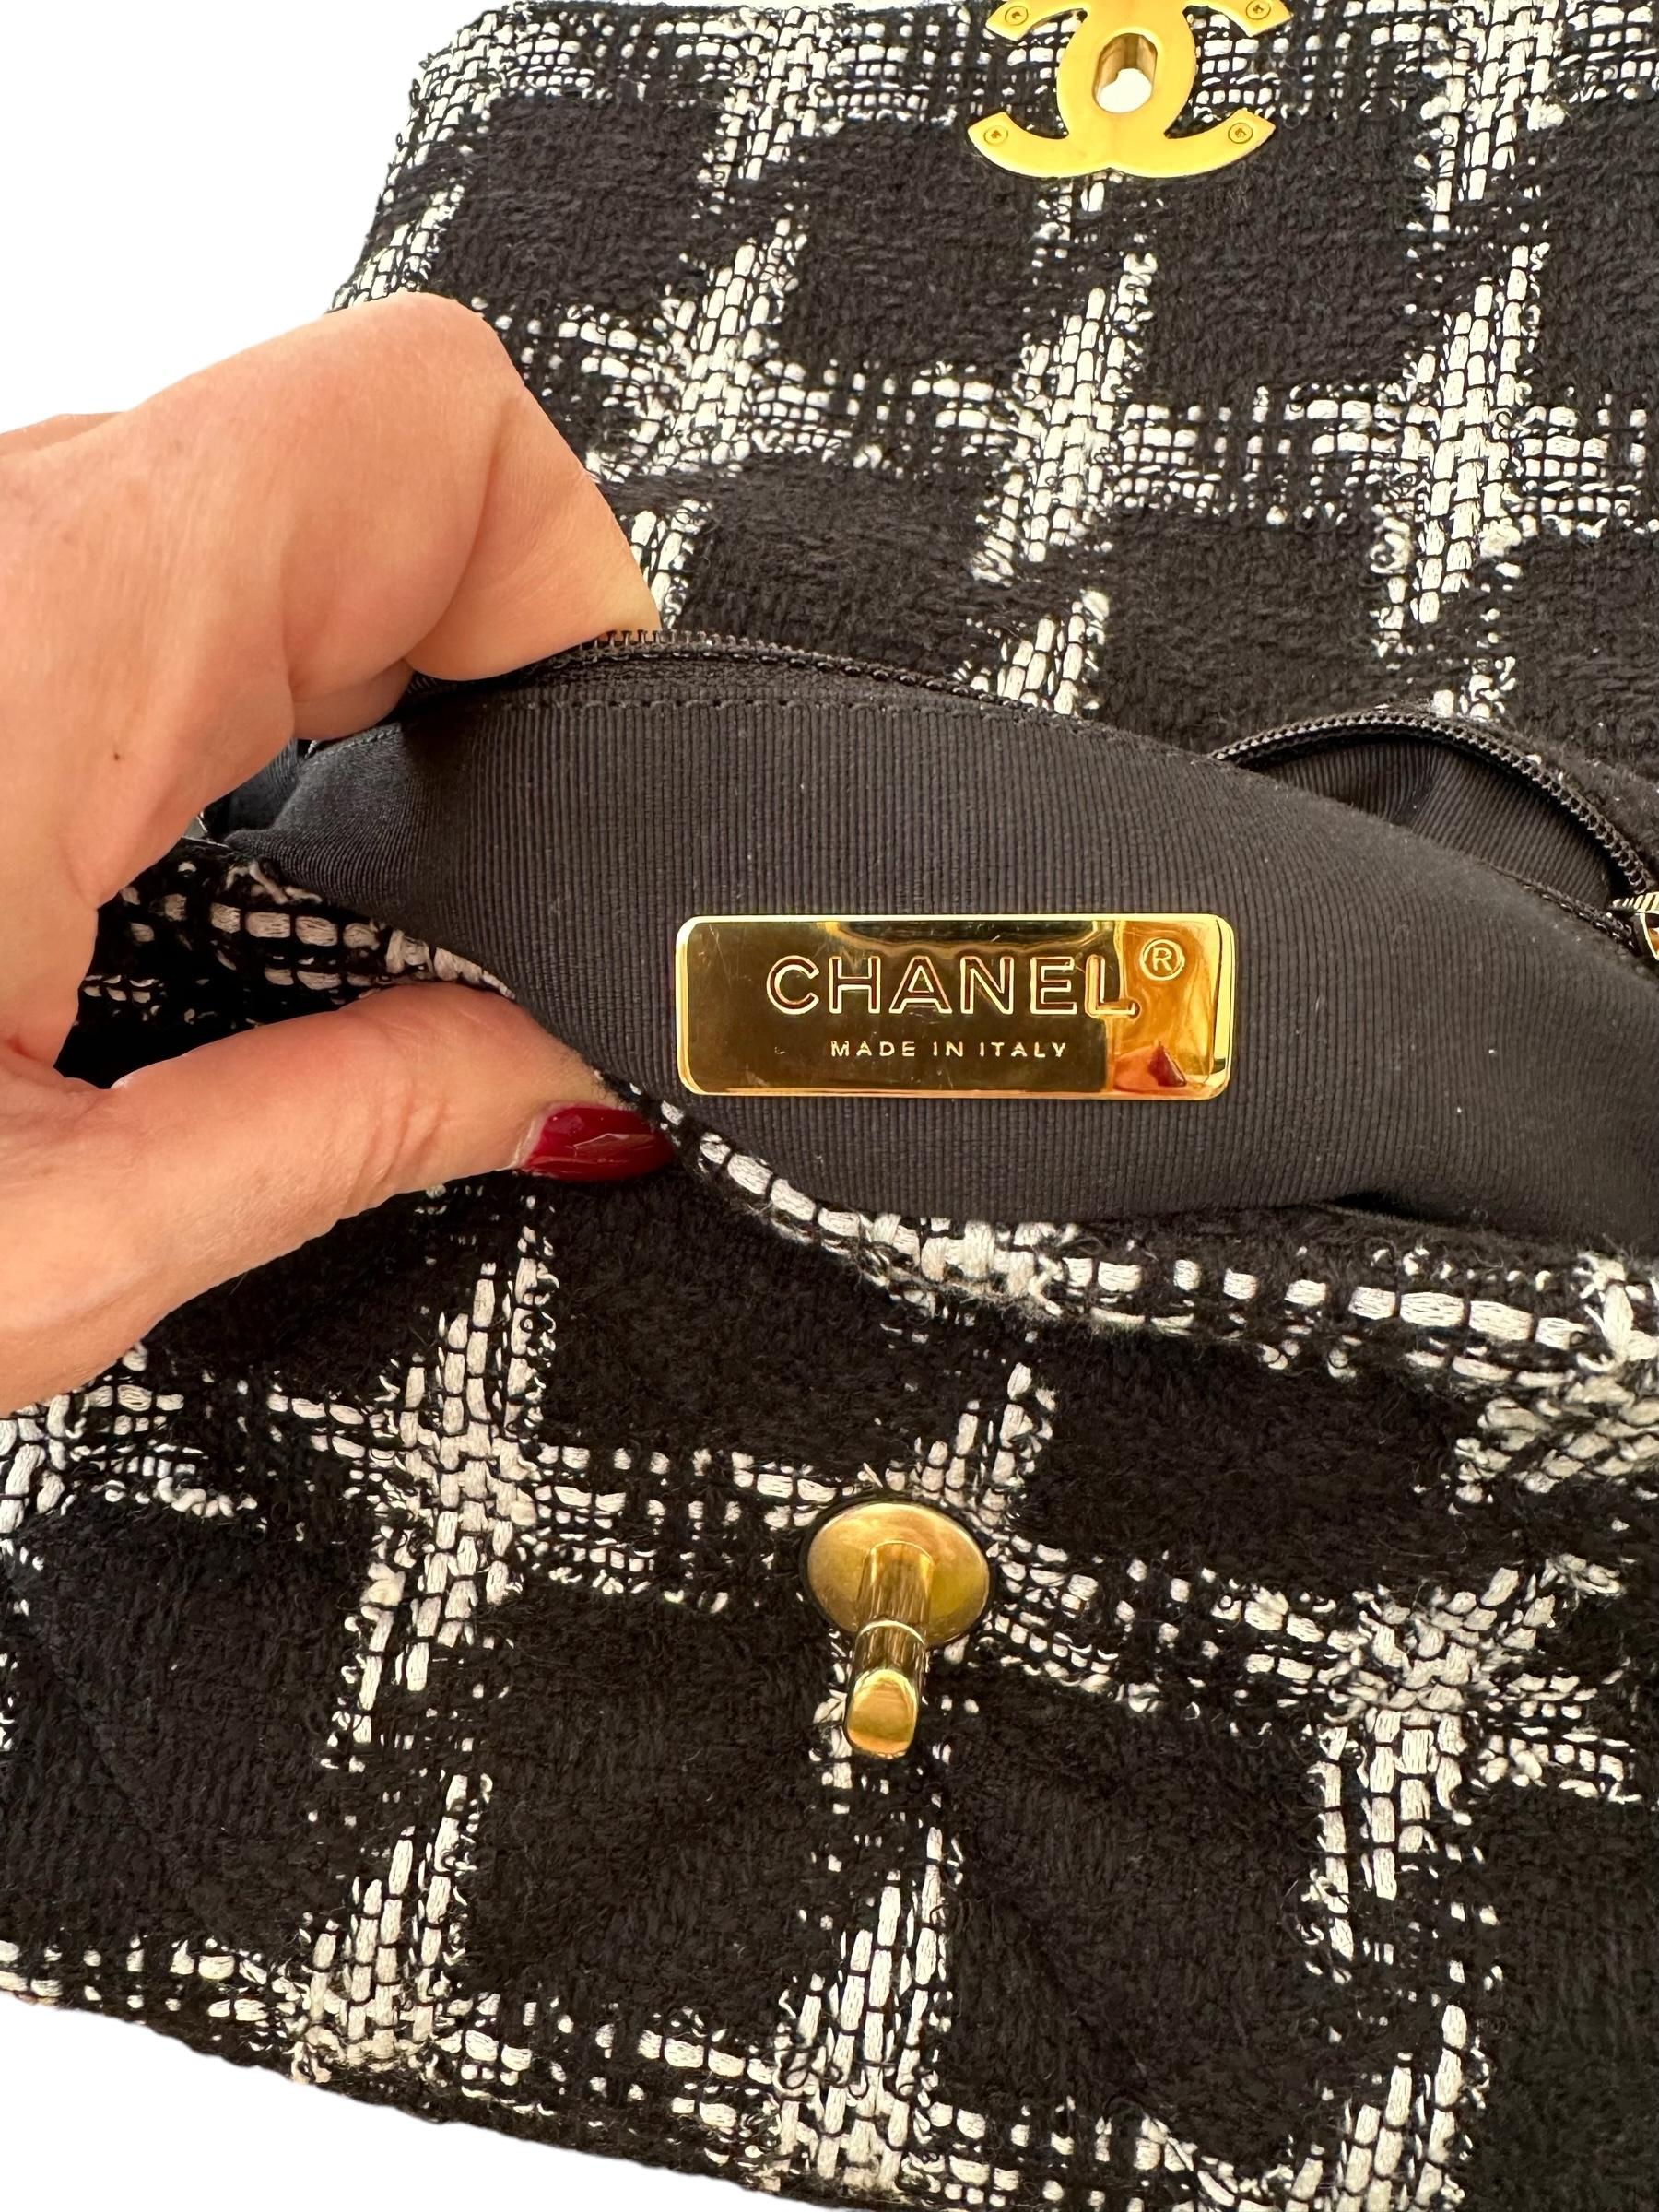 Chanel Black and White Tweed Chanel 19 Flap Bag For Sale 6